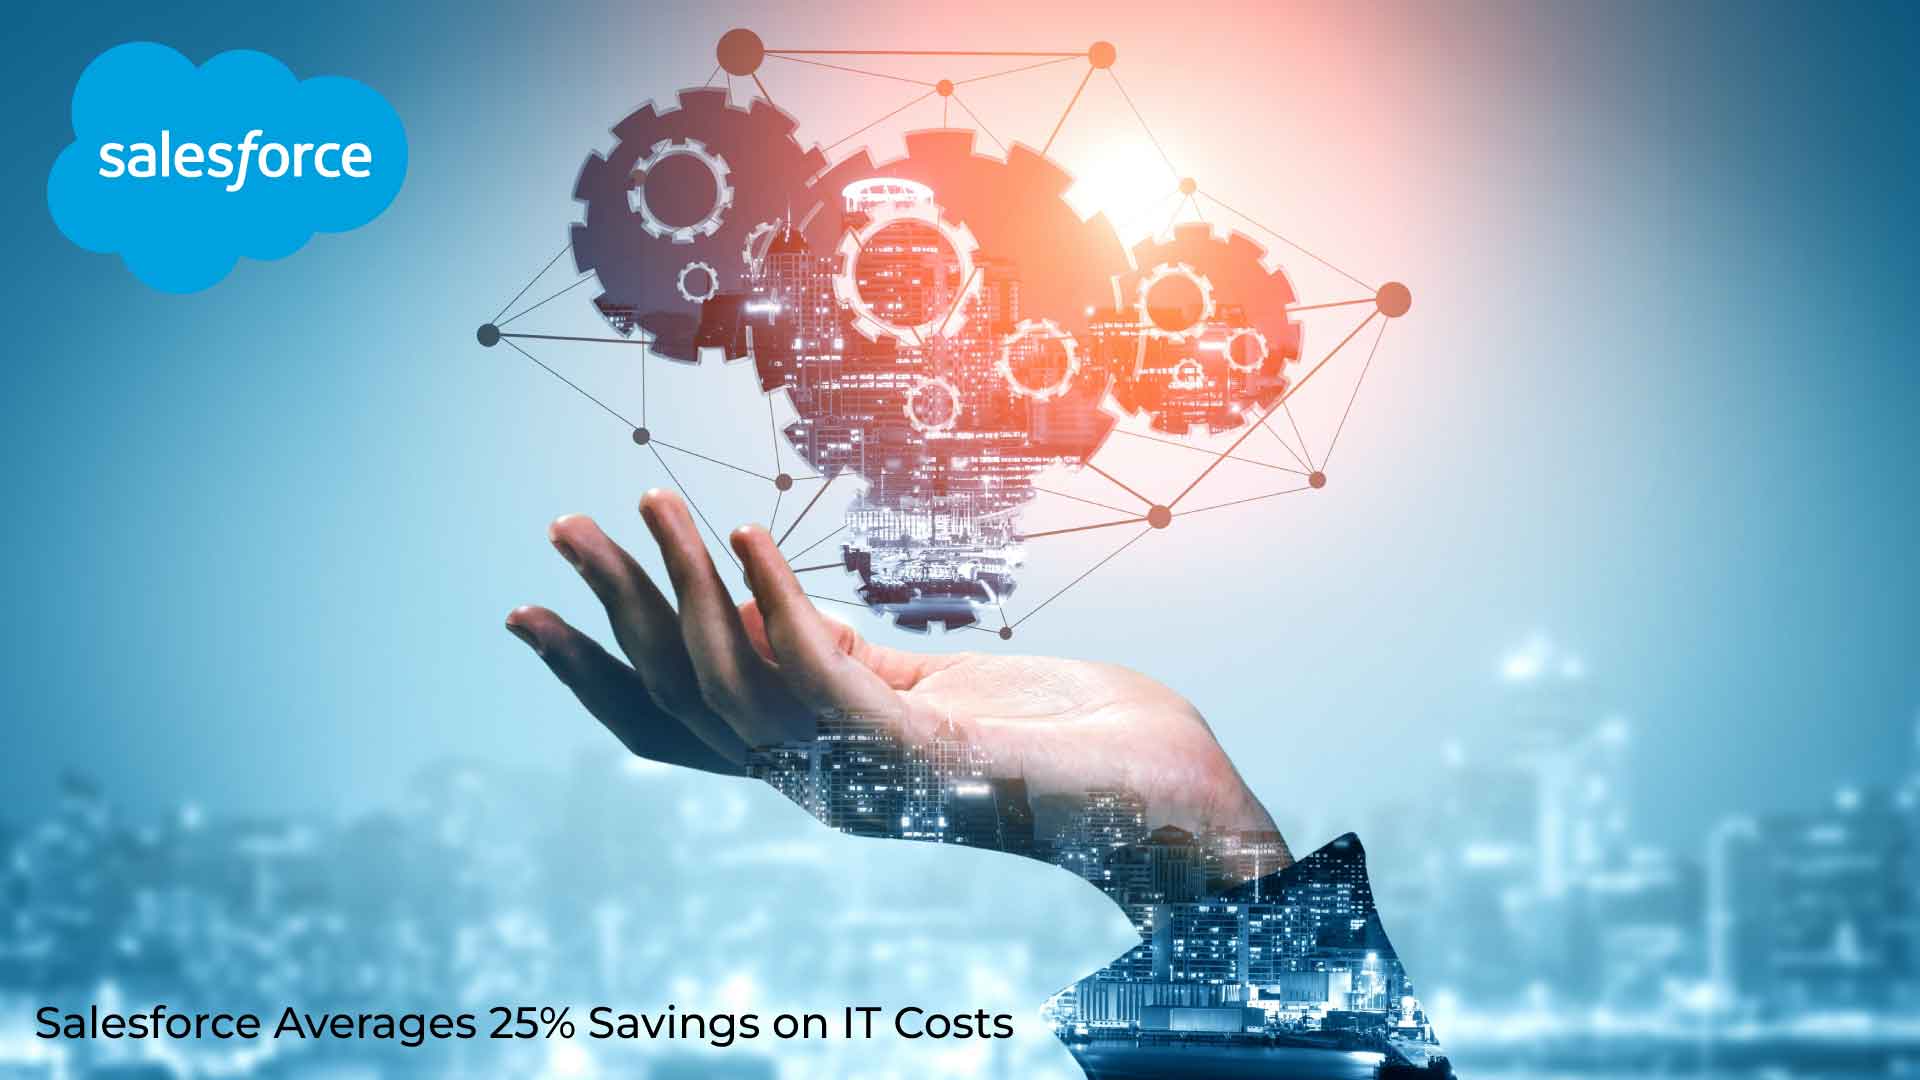 New Research: Companies Globally Report an Average of 25% IT Cost Savings with Salesforce